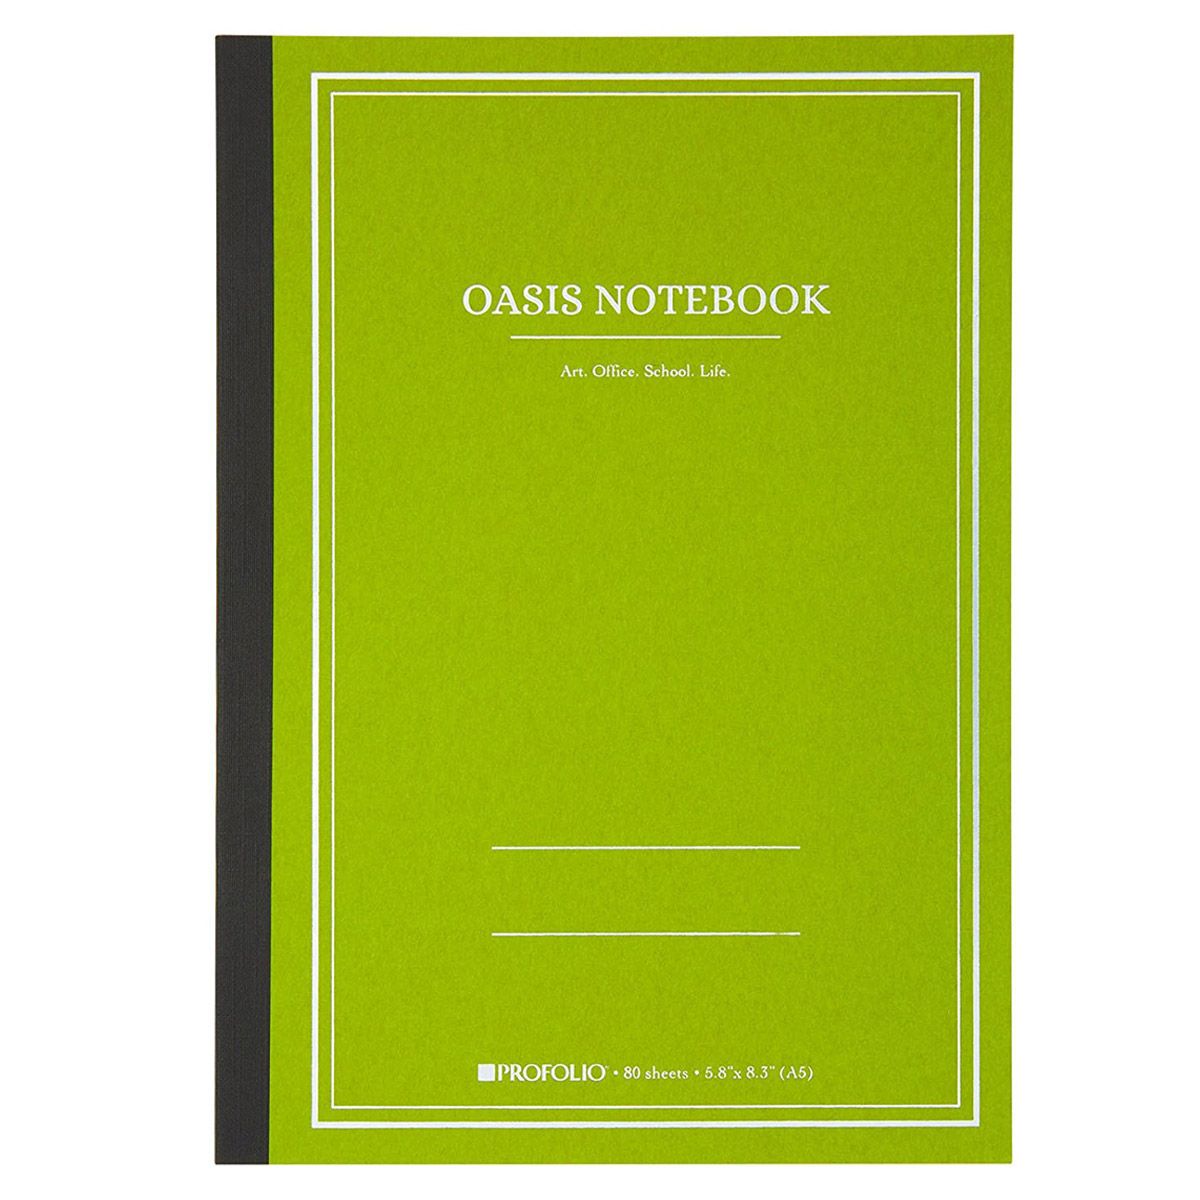 Oasis Notebook Avocado, B5 (Large) - 7 x 9.9 Inches